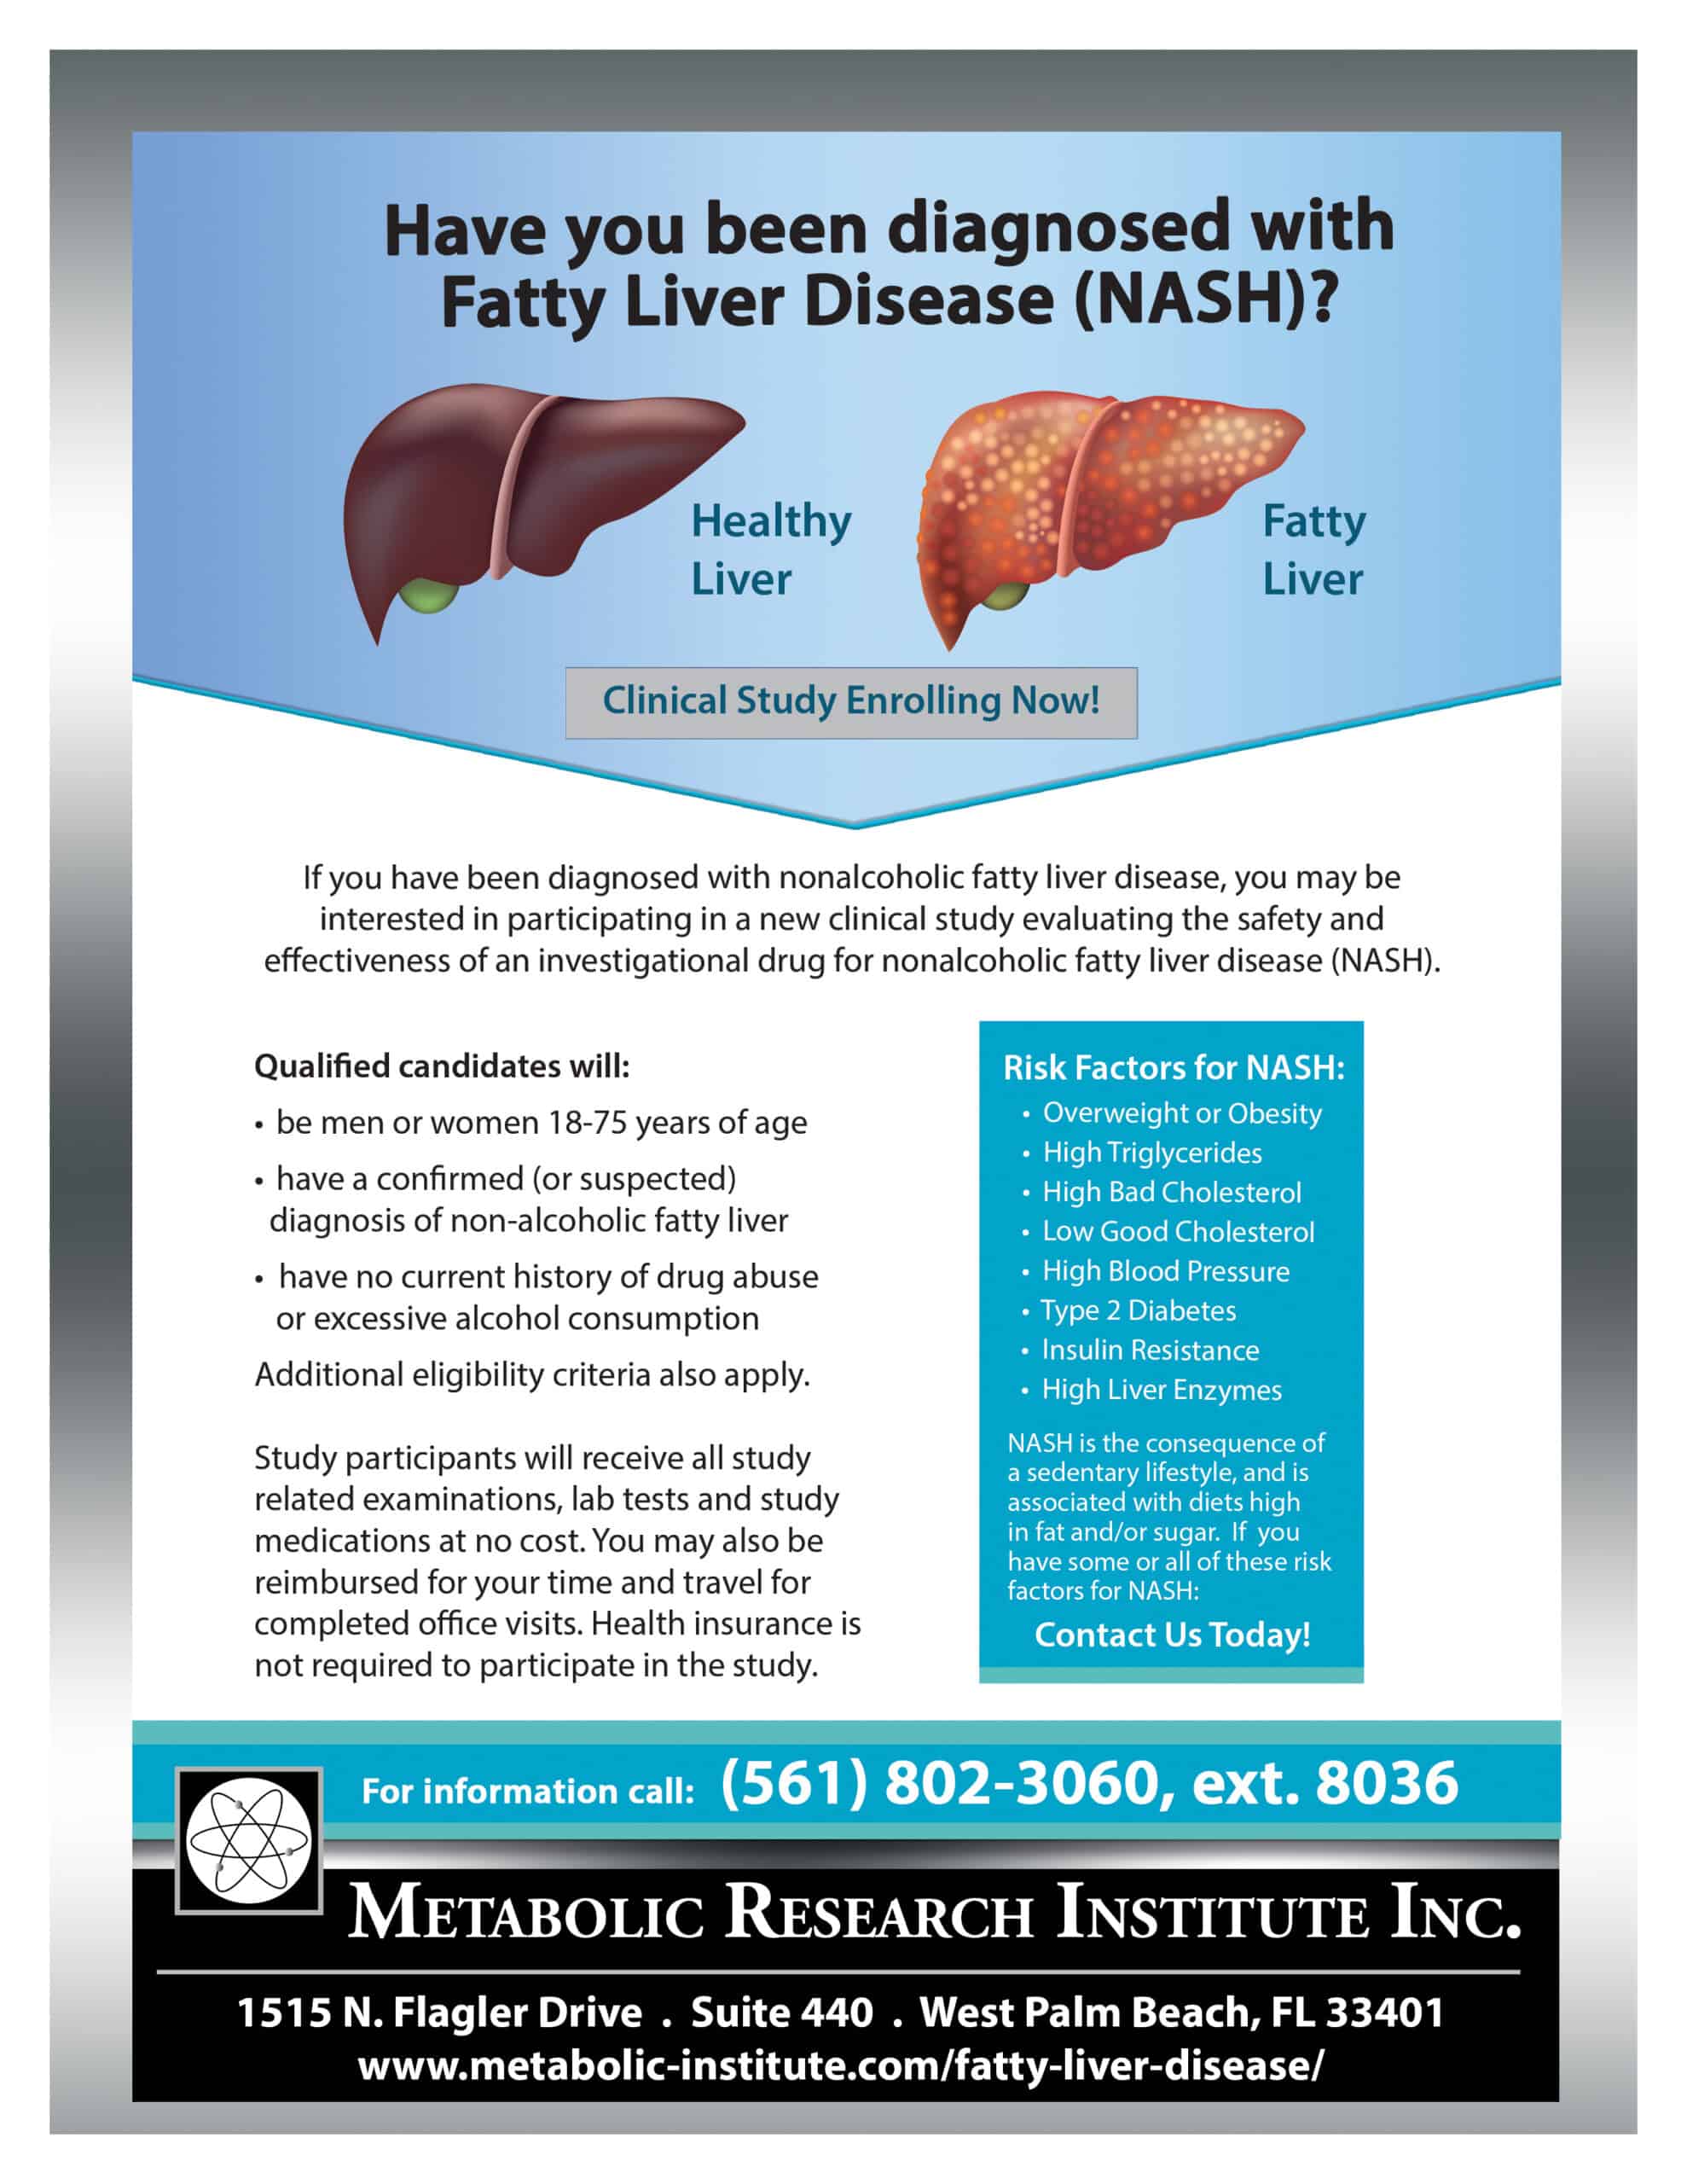 Fatty Liver Disease (NASH) clinical study flyer